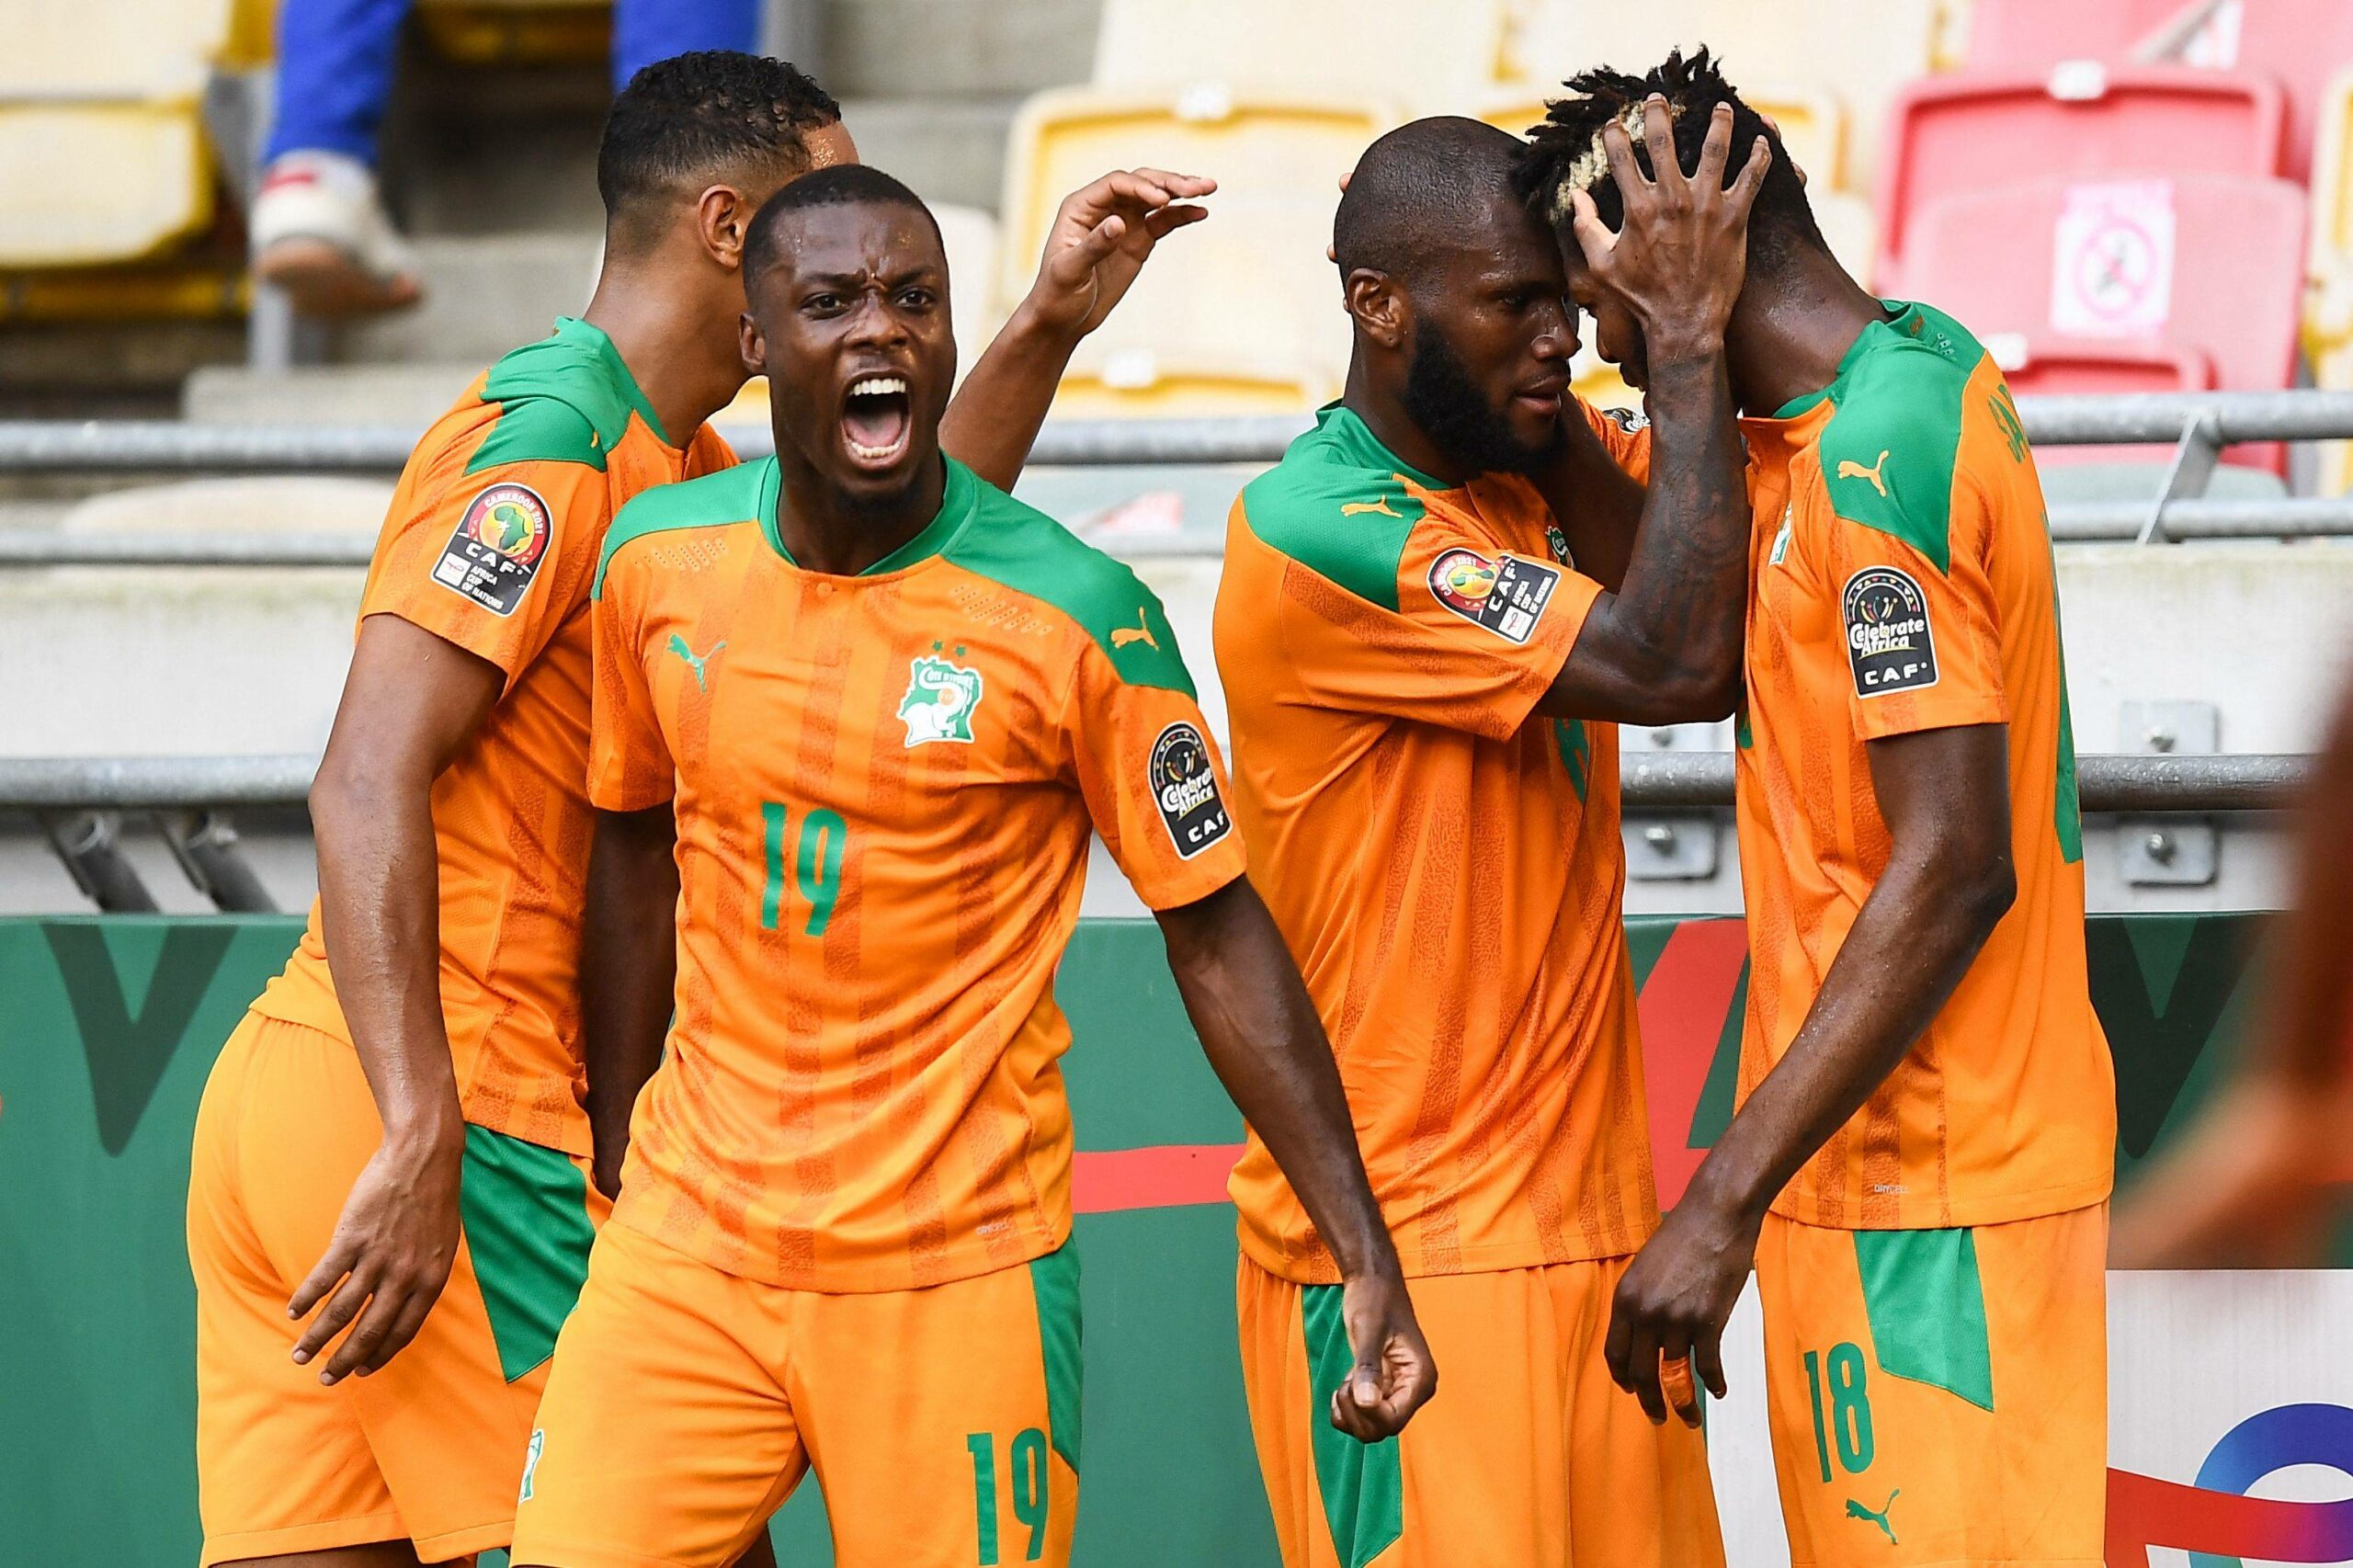 Ivory Coast's midfielder Franck Kessie (2nd R) celebrates with Ivory Coast's midfielder Ibrahim Sangare (R) and Ivory Coast's forward Nicolas Pepe (2nd L) after scoring his team's first goal during the Group E Africa Cup of Nations (CAN) 2021 football match between Ivory Coast and Algeria at Stade de Japoma in Douala on January 20, 2022.  (Photo by CHARLY TRIBALLEAU / AFP)